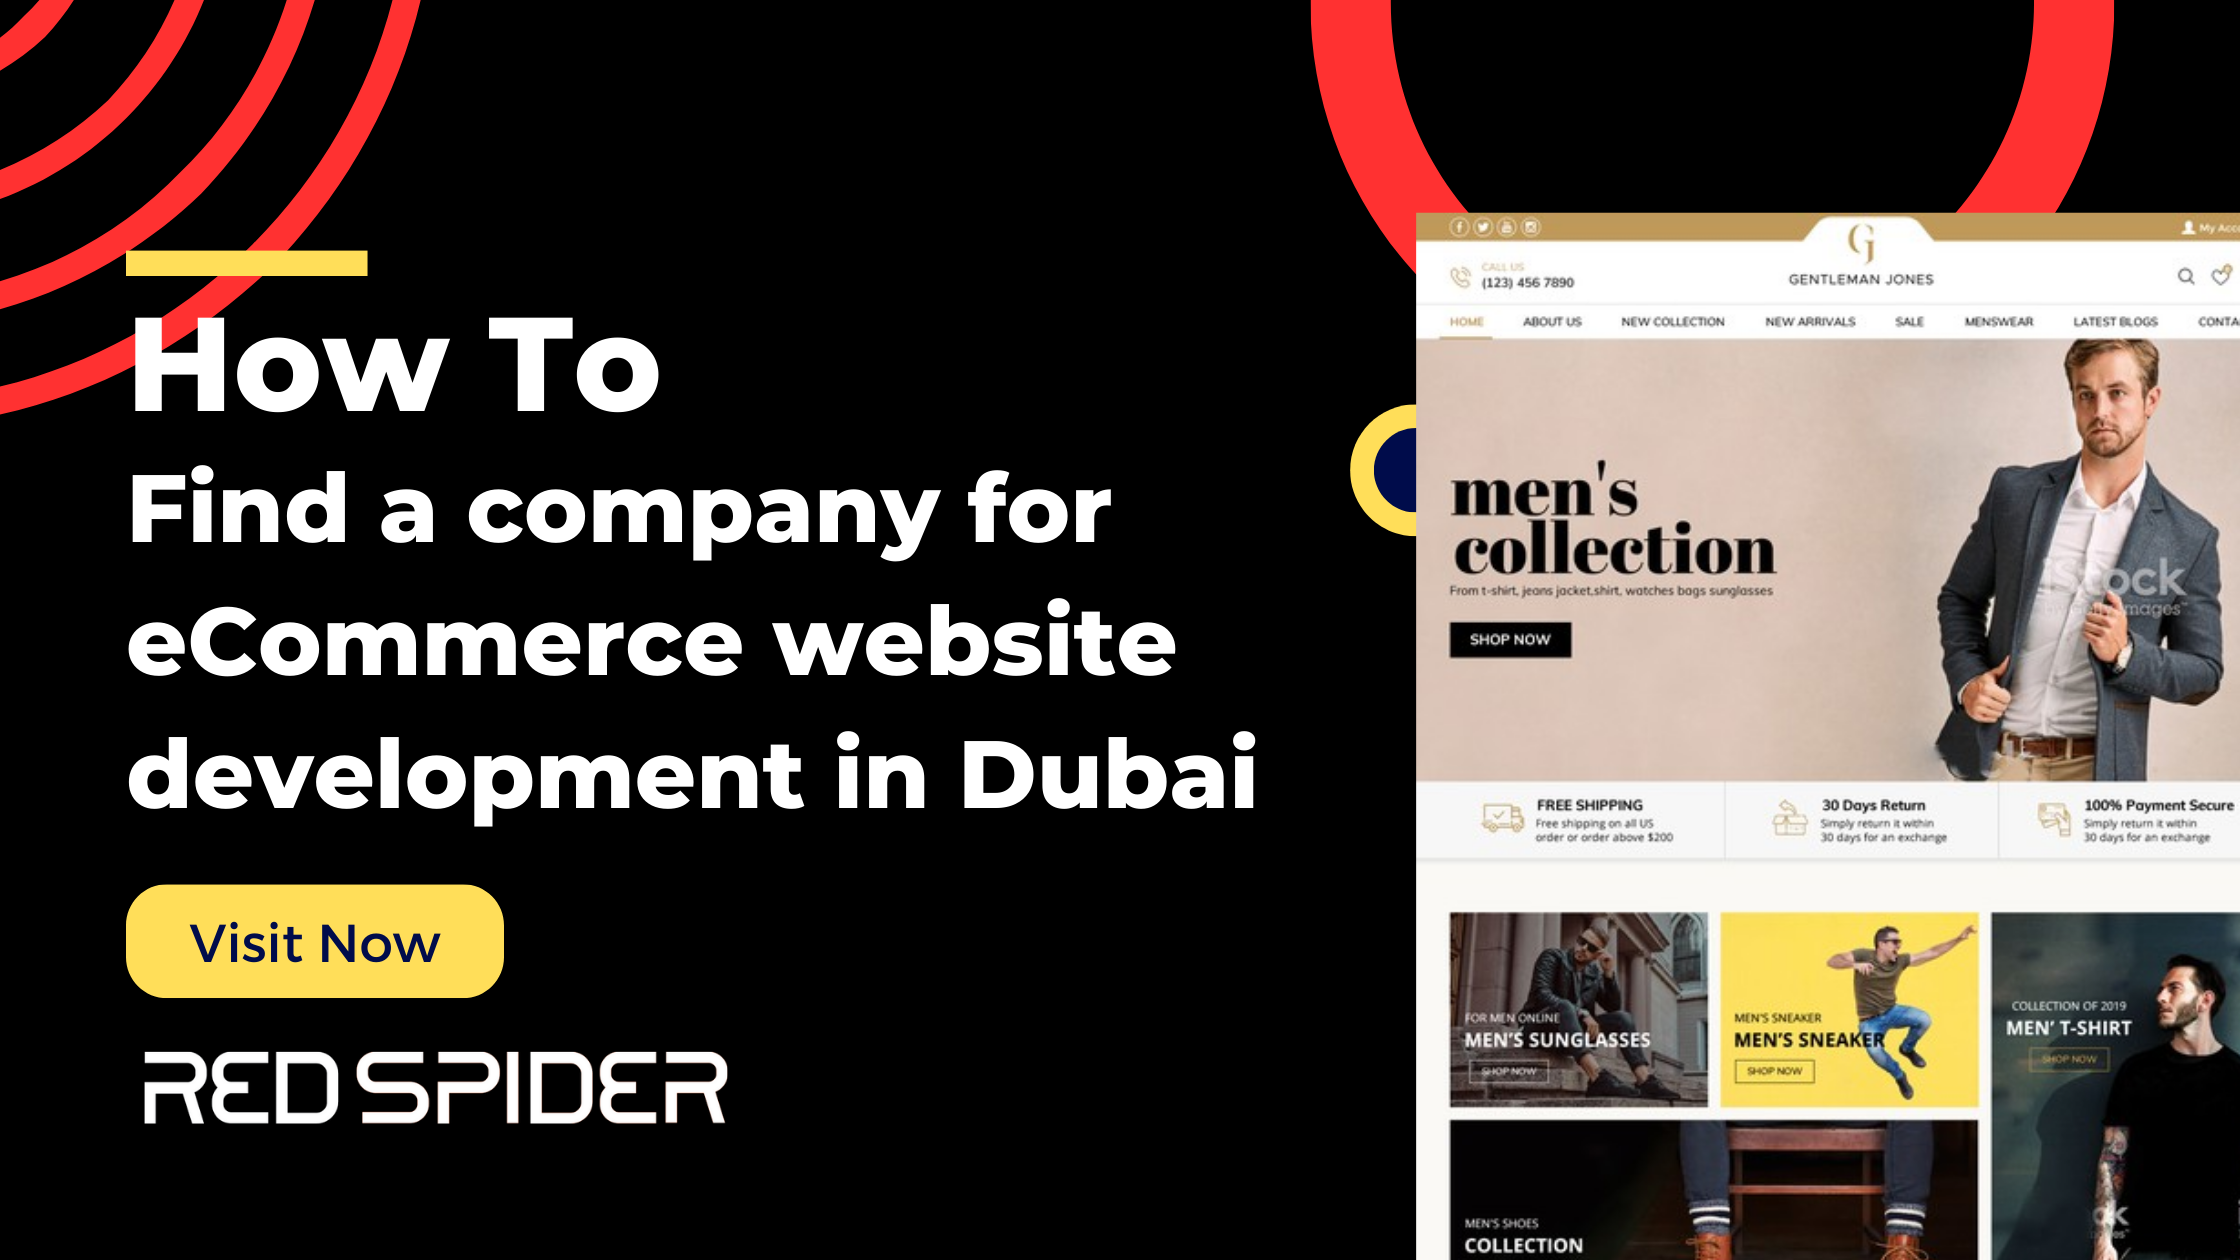 How to choose a company for Ecommerce website development in Dubai?